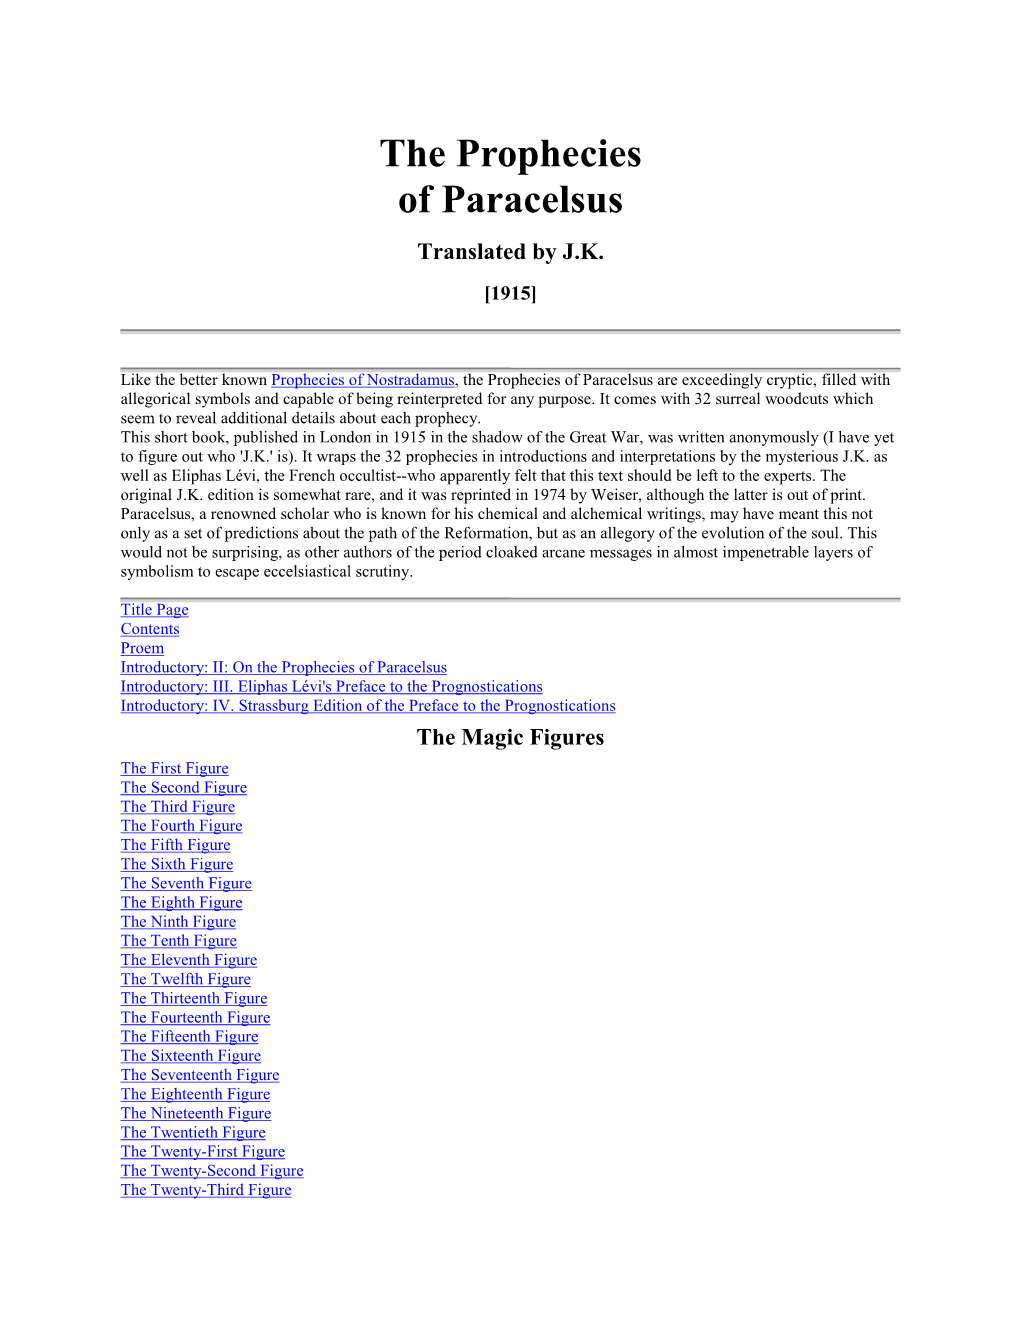 The Prophecies of Paracelsus Translated by J.K